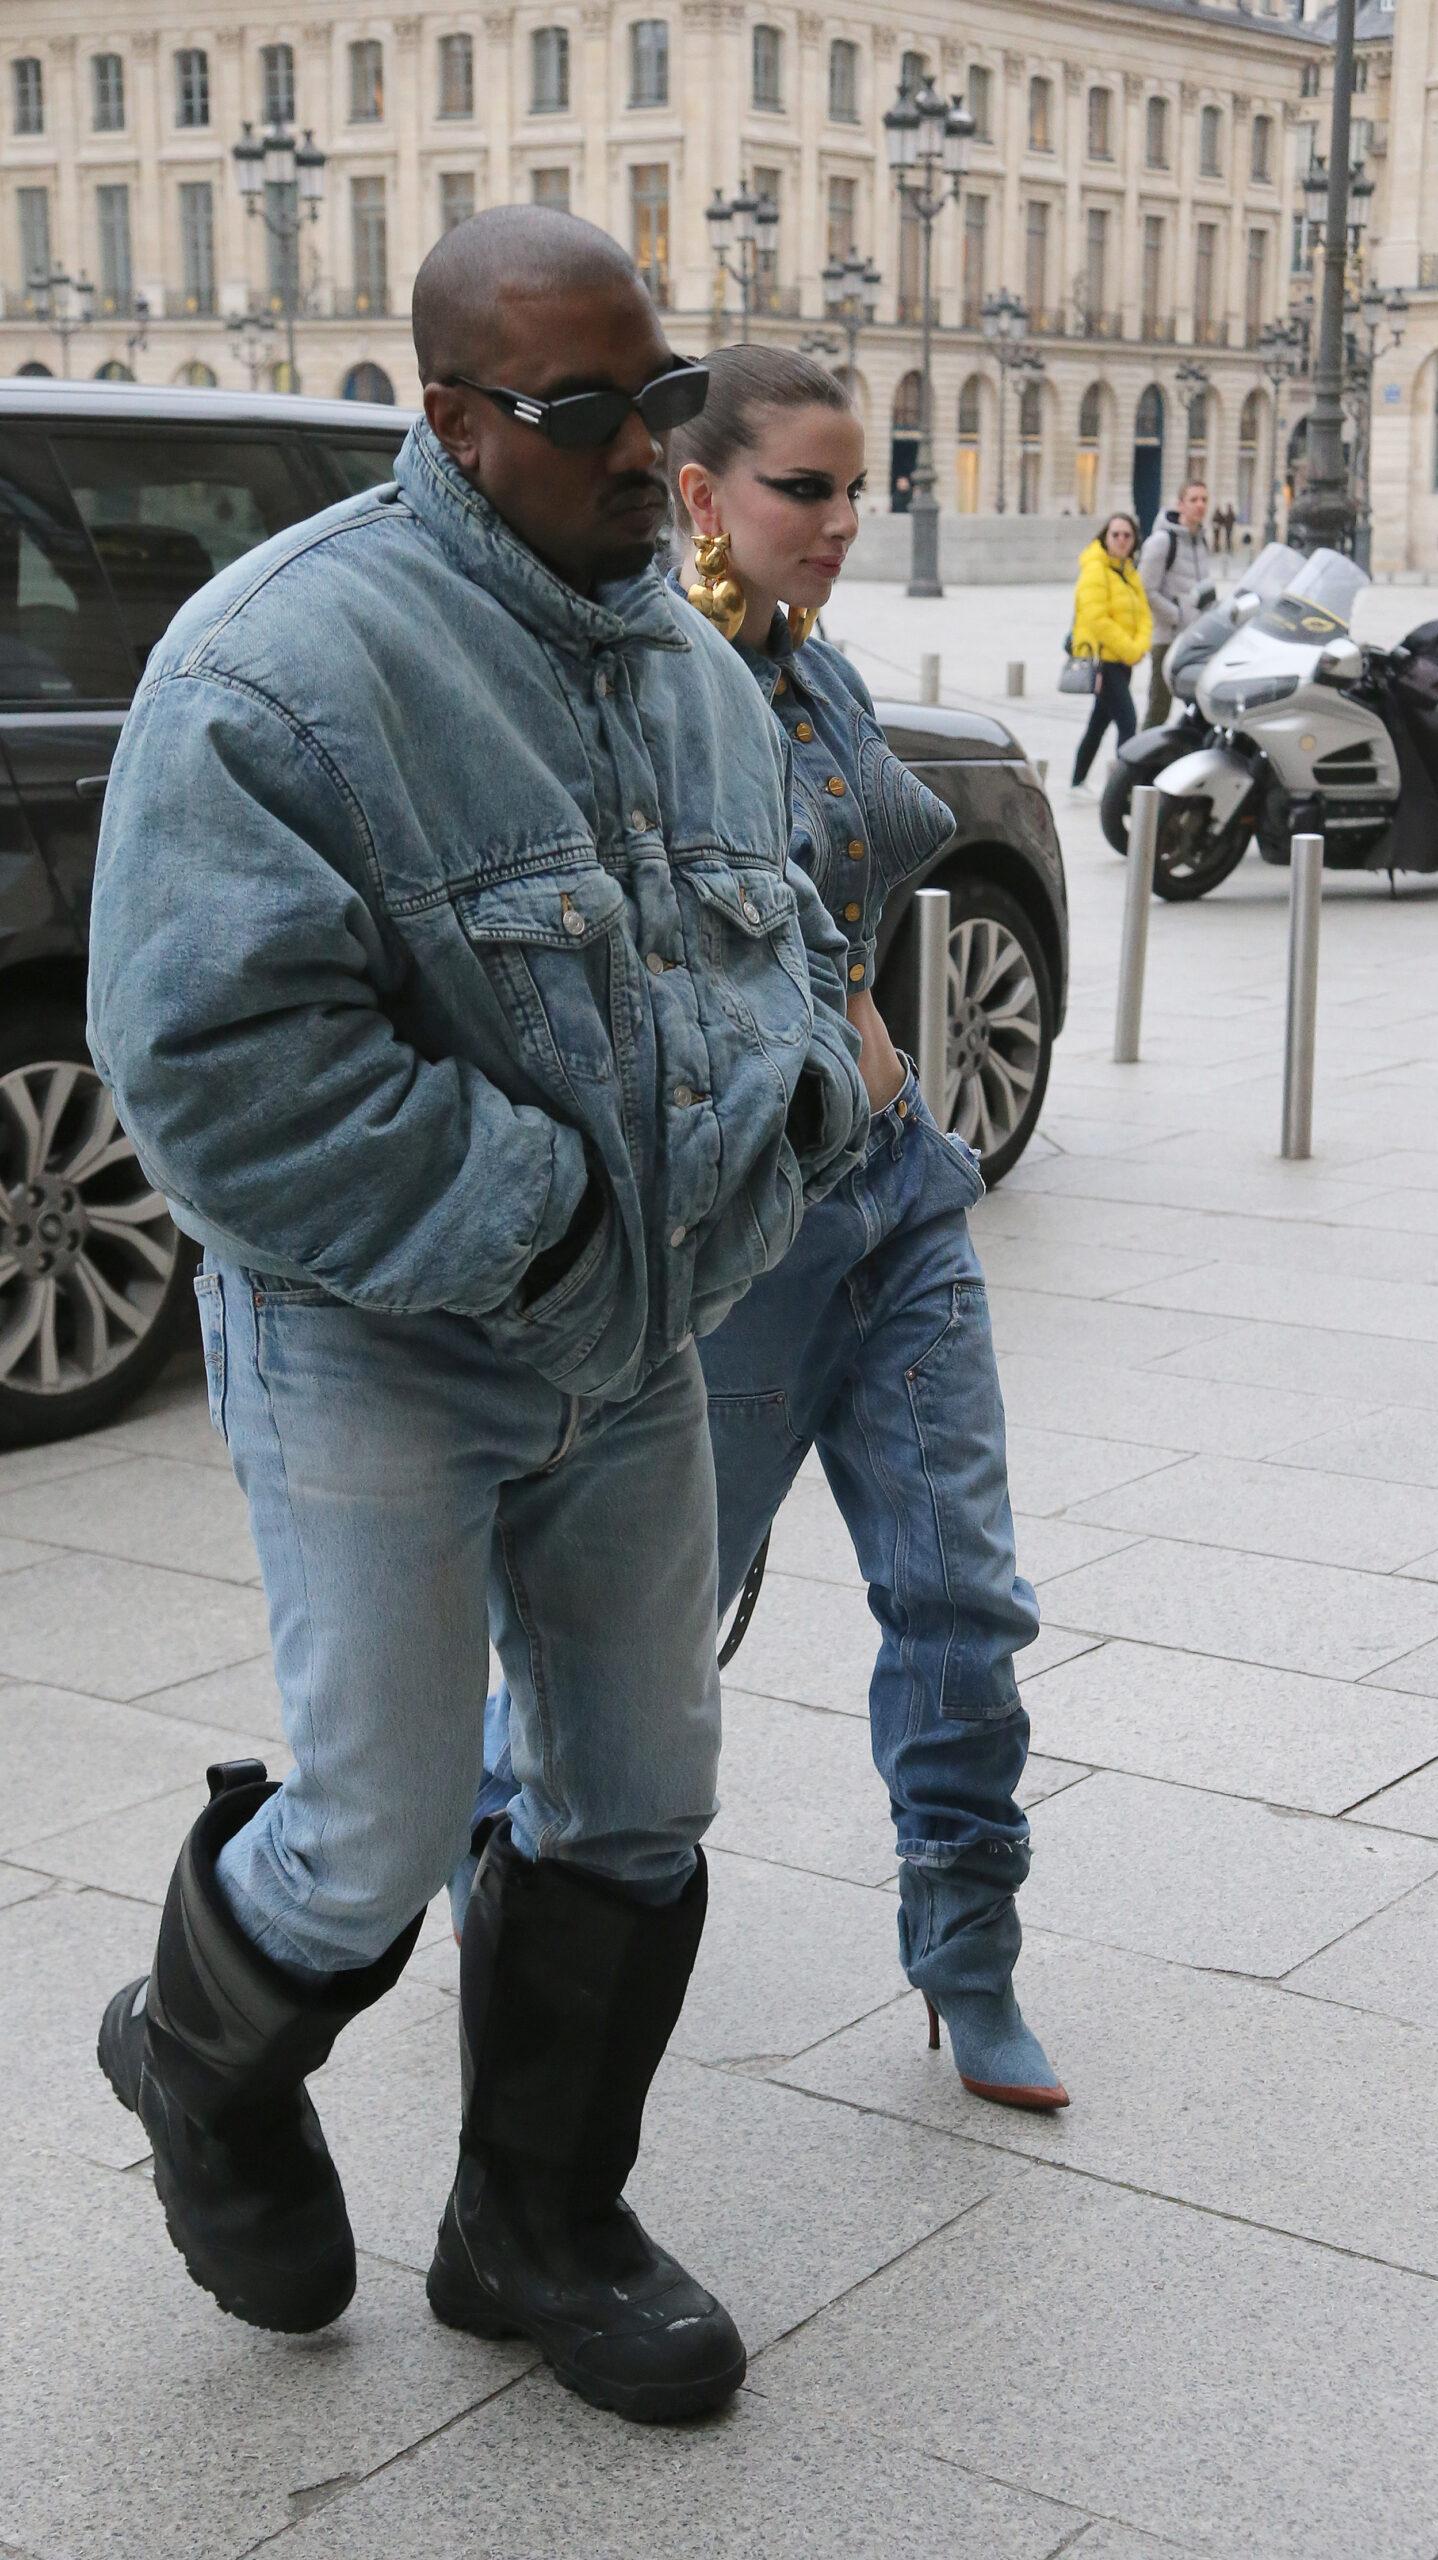 Kanye West and Julia Fox seen as they come back from the Kenzo show during the Fashion Week in Paris on january 23rd 2022. 23 Jan 2022 Pictured: Kanye West and Julia Fox. Photo credit: KCS Presse / MEGA TheMegaAgency.com +1 888 505 6342 (Mega Agency TagID: MEGA822016_013.jpg) [Photo via Mega Agency]